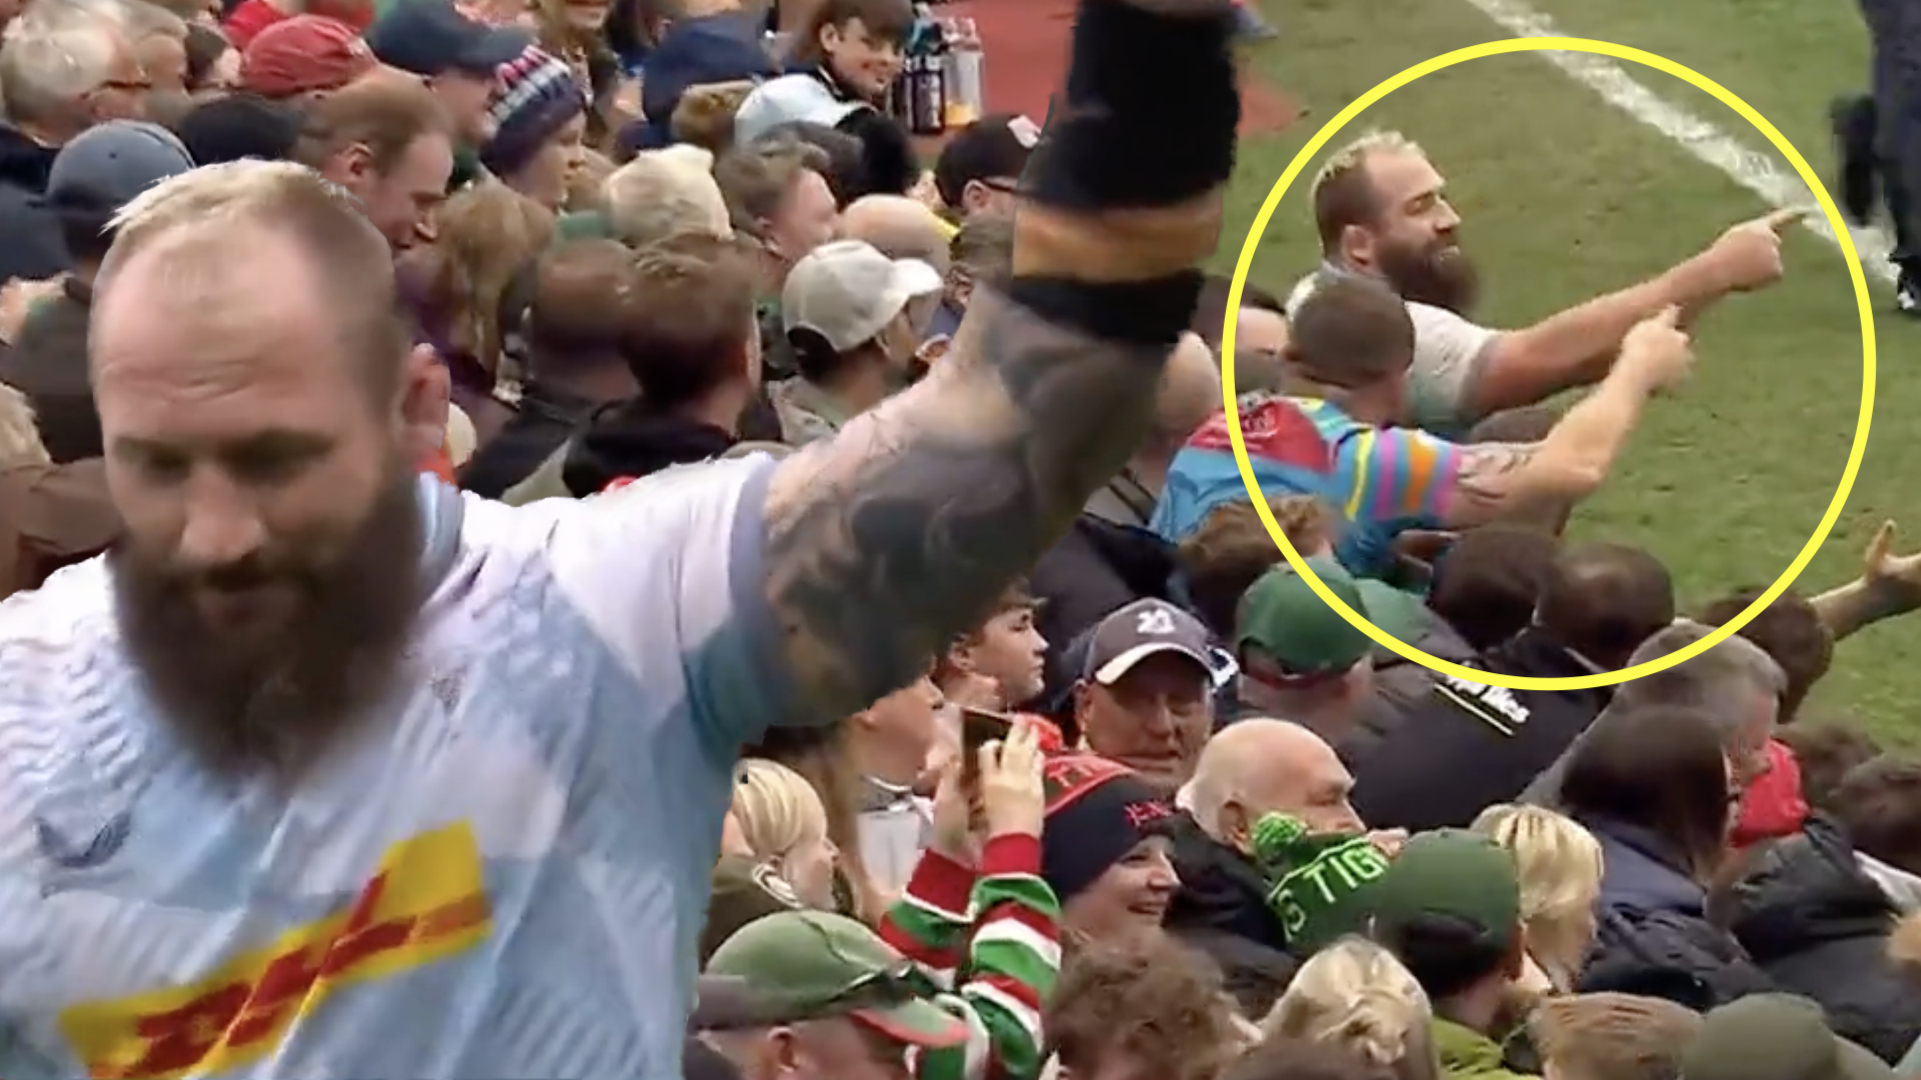 Joe Marler saved his strangest moment for the final seconds of the season